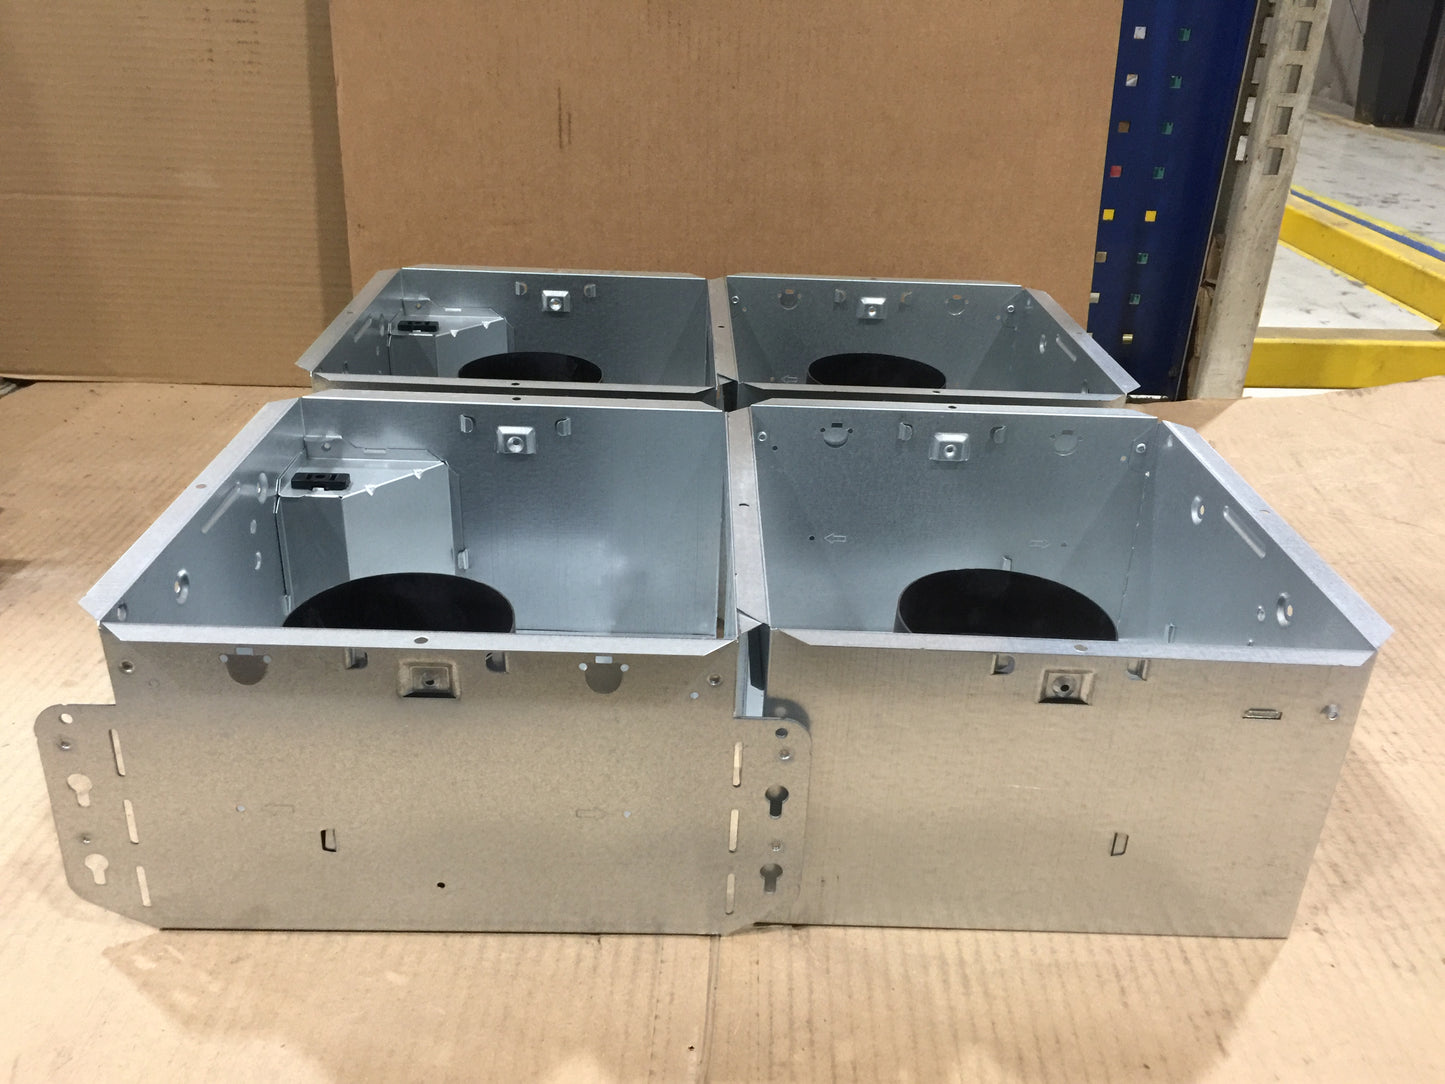 INVENT SERIES VENTILATION FAN HOUSING PACK; SOLD AS 4PK